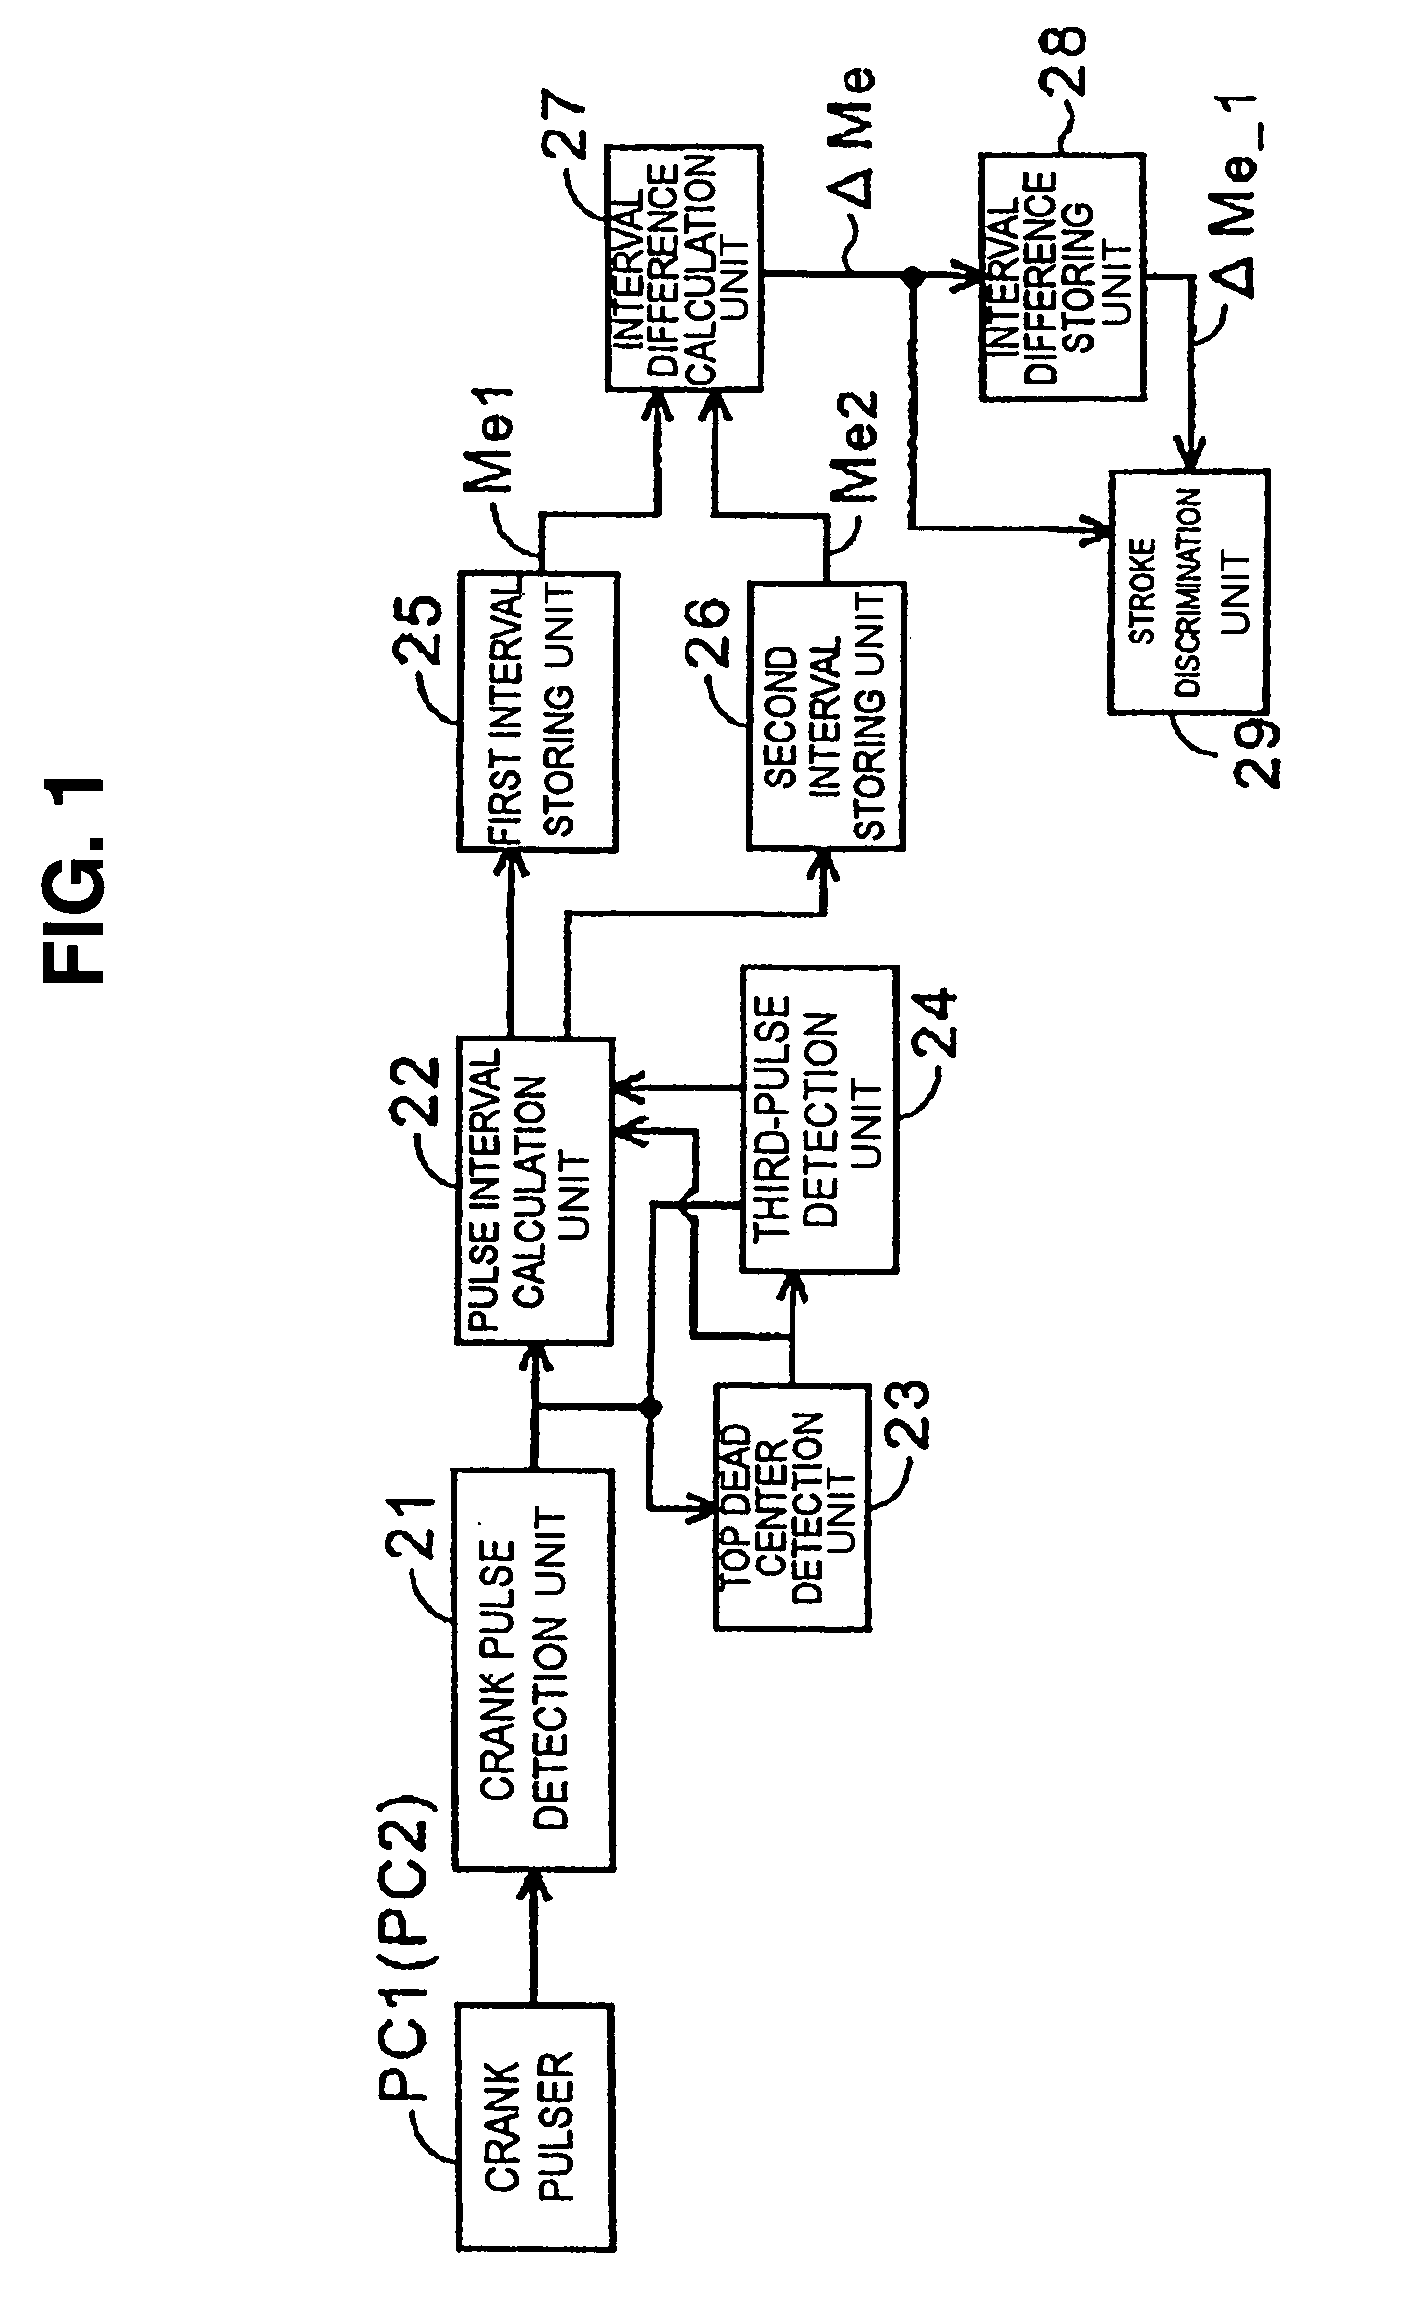 Method and apparatus for detecting a stroke of a 4-cycle internal combustion engine, based on changes in rotary engine speed